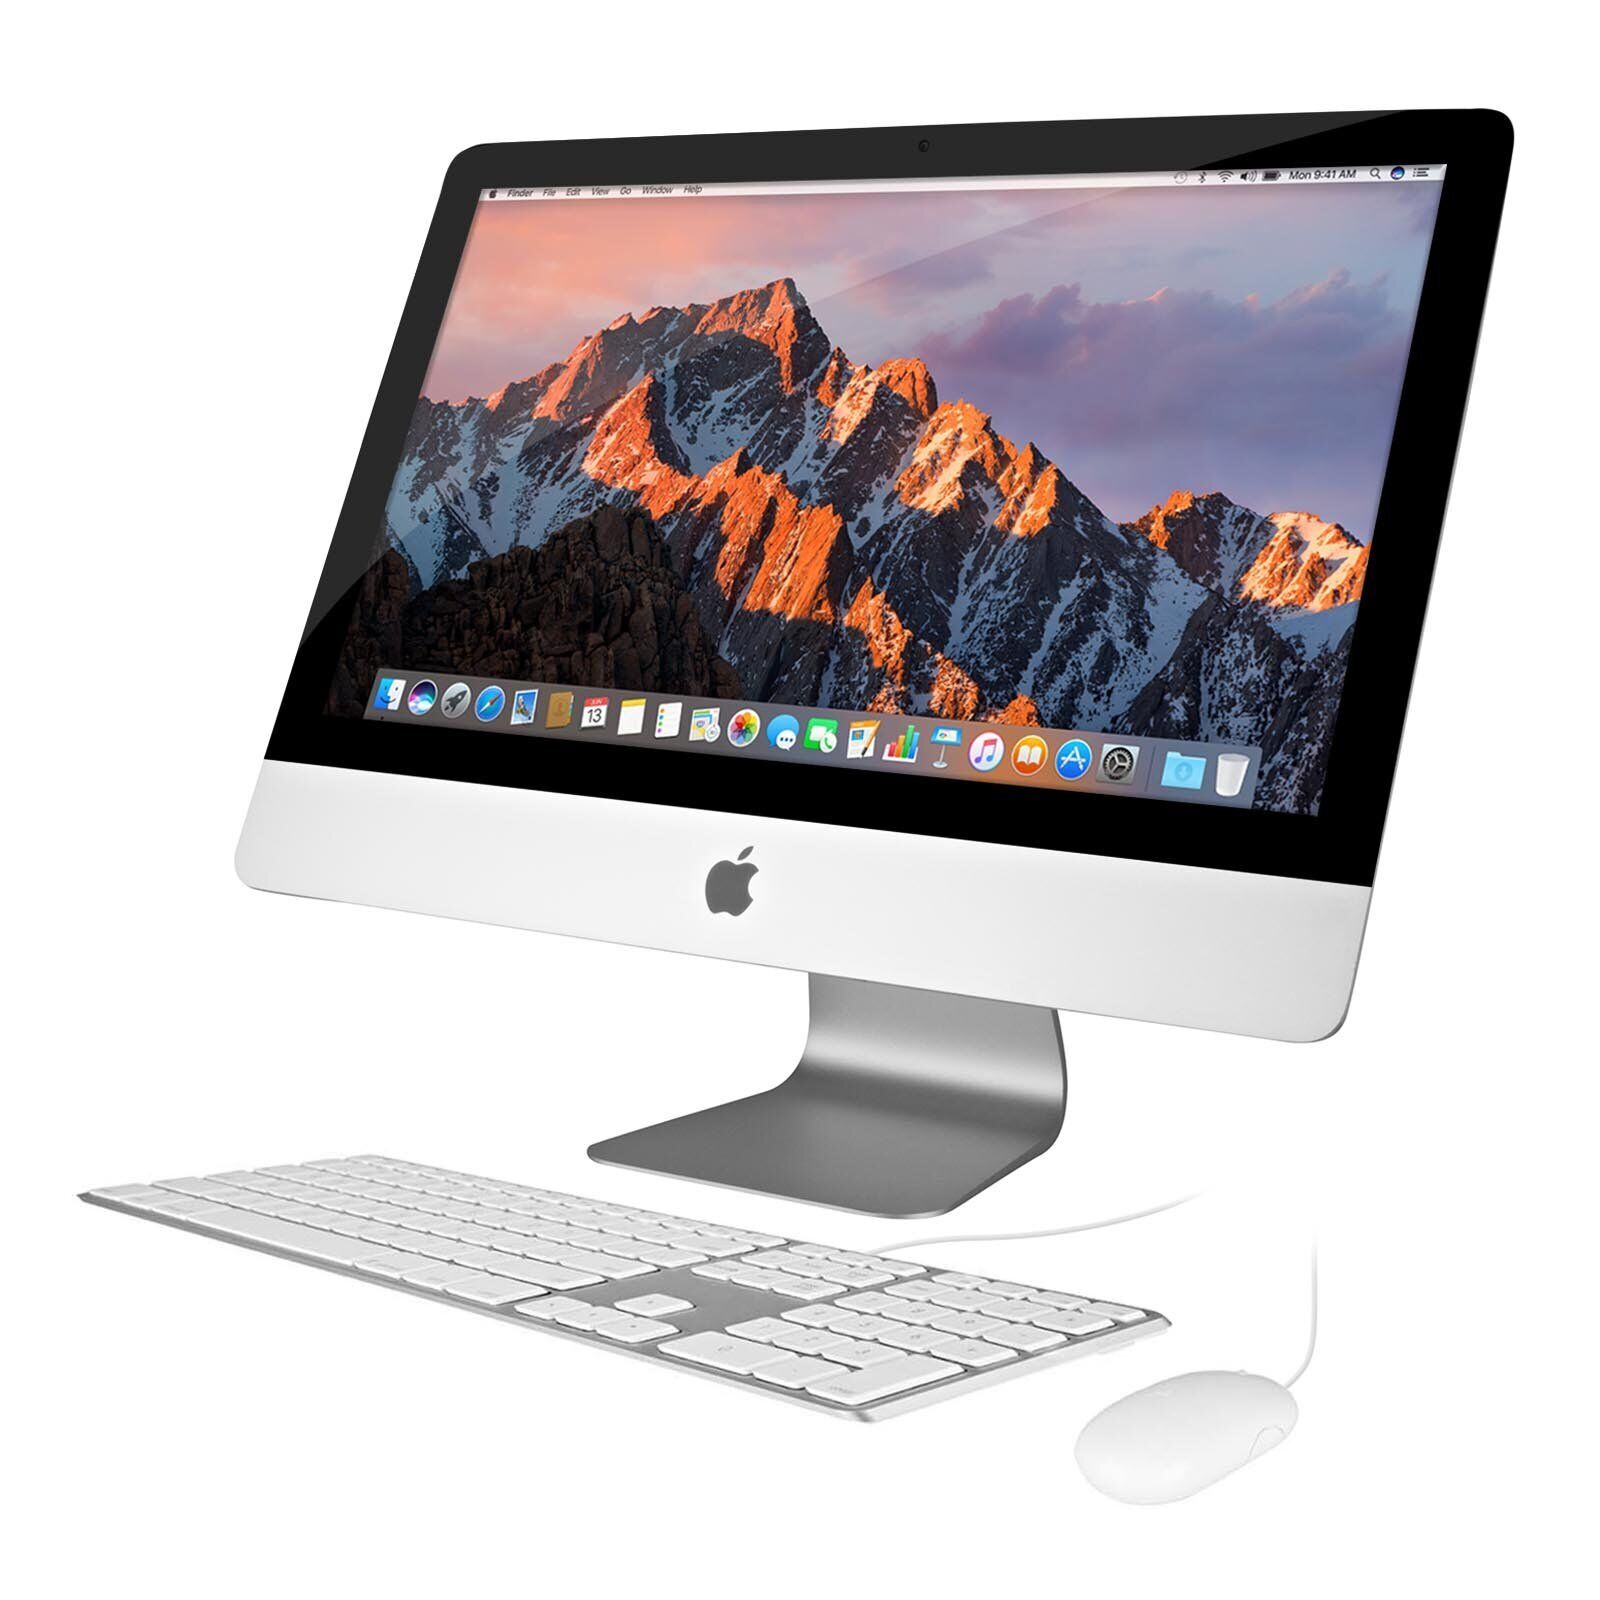 Apple iMac 21.5in 2.7GHz Core i5 (ME086LL/A) All In One Desktop, 8GB Memory, 1TB